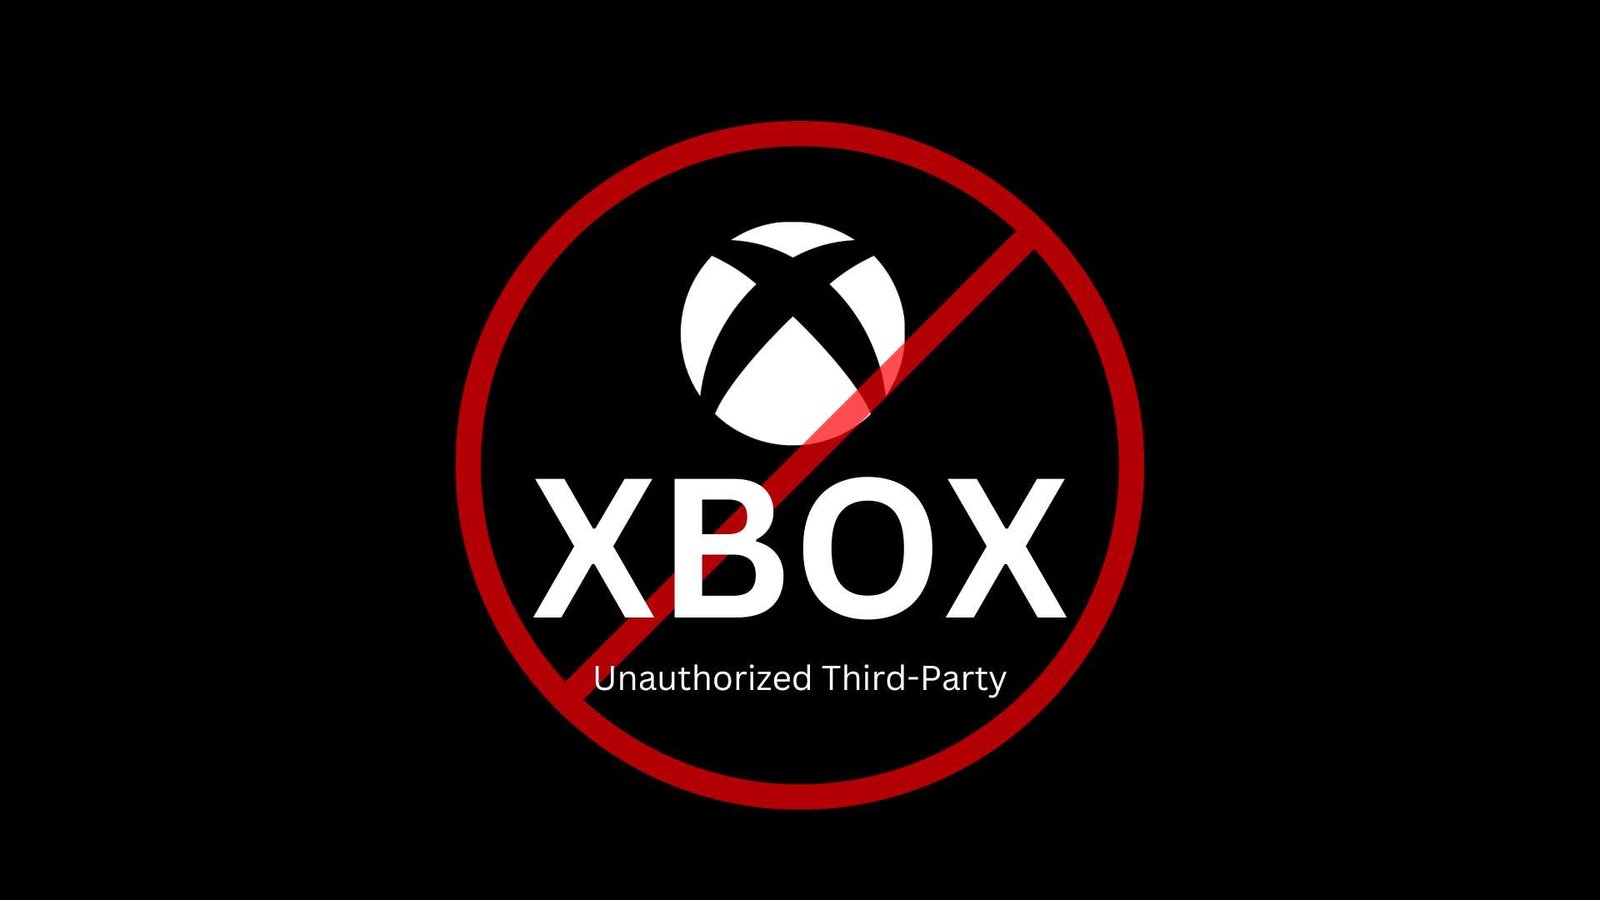 Xbox Crackdown on Unauthorized Third-Party Accessories: Is Your Controller Safe?